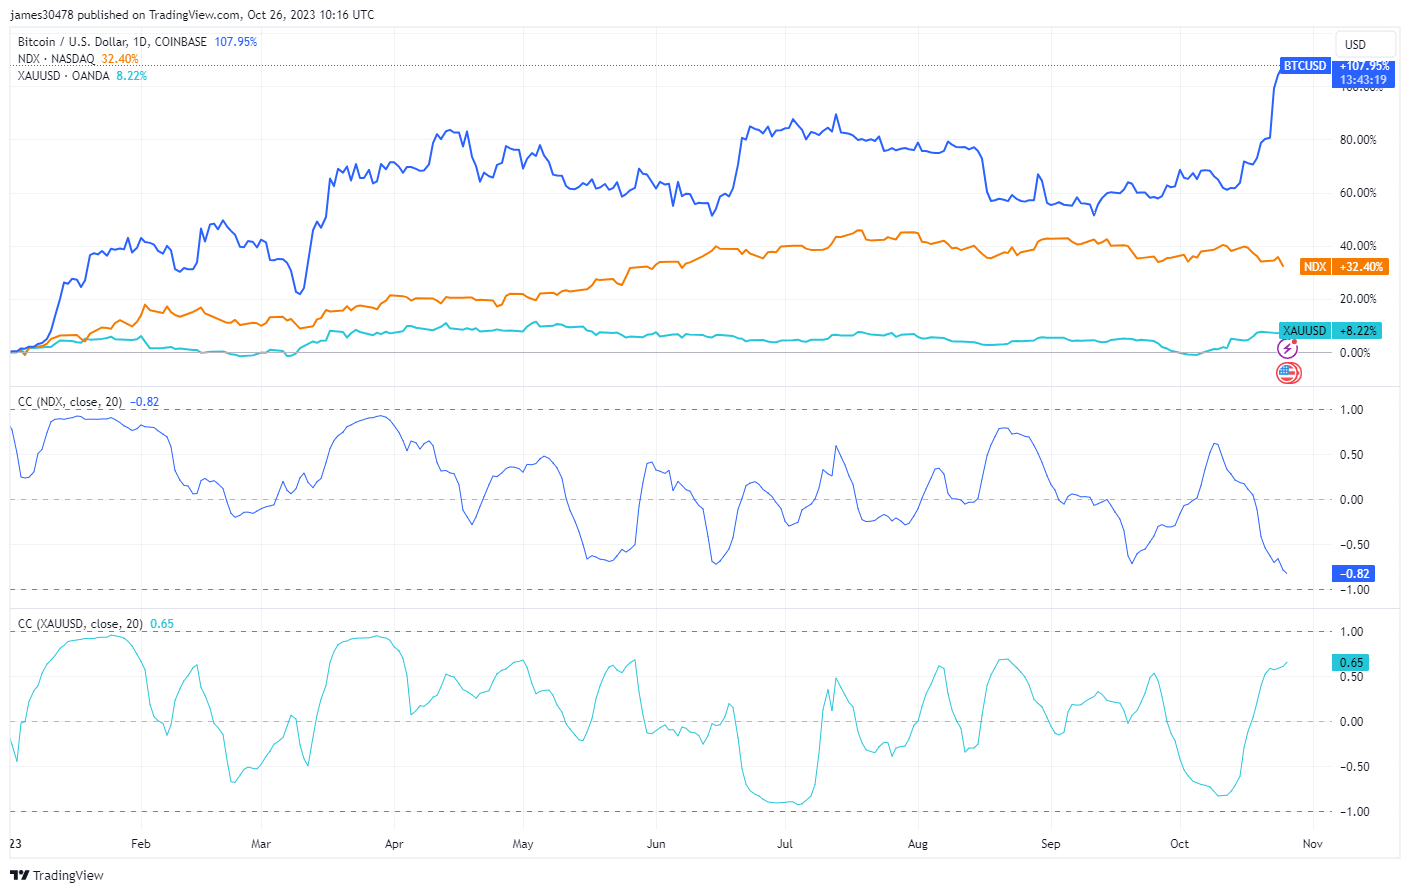 BTC Correlation with Nasdaq and Gold: (Source: Trading View)